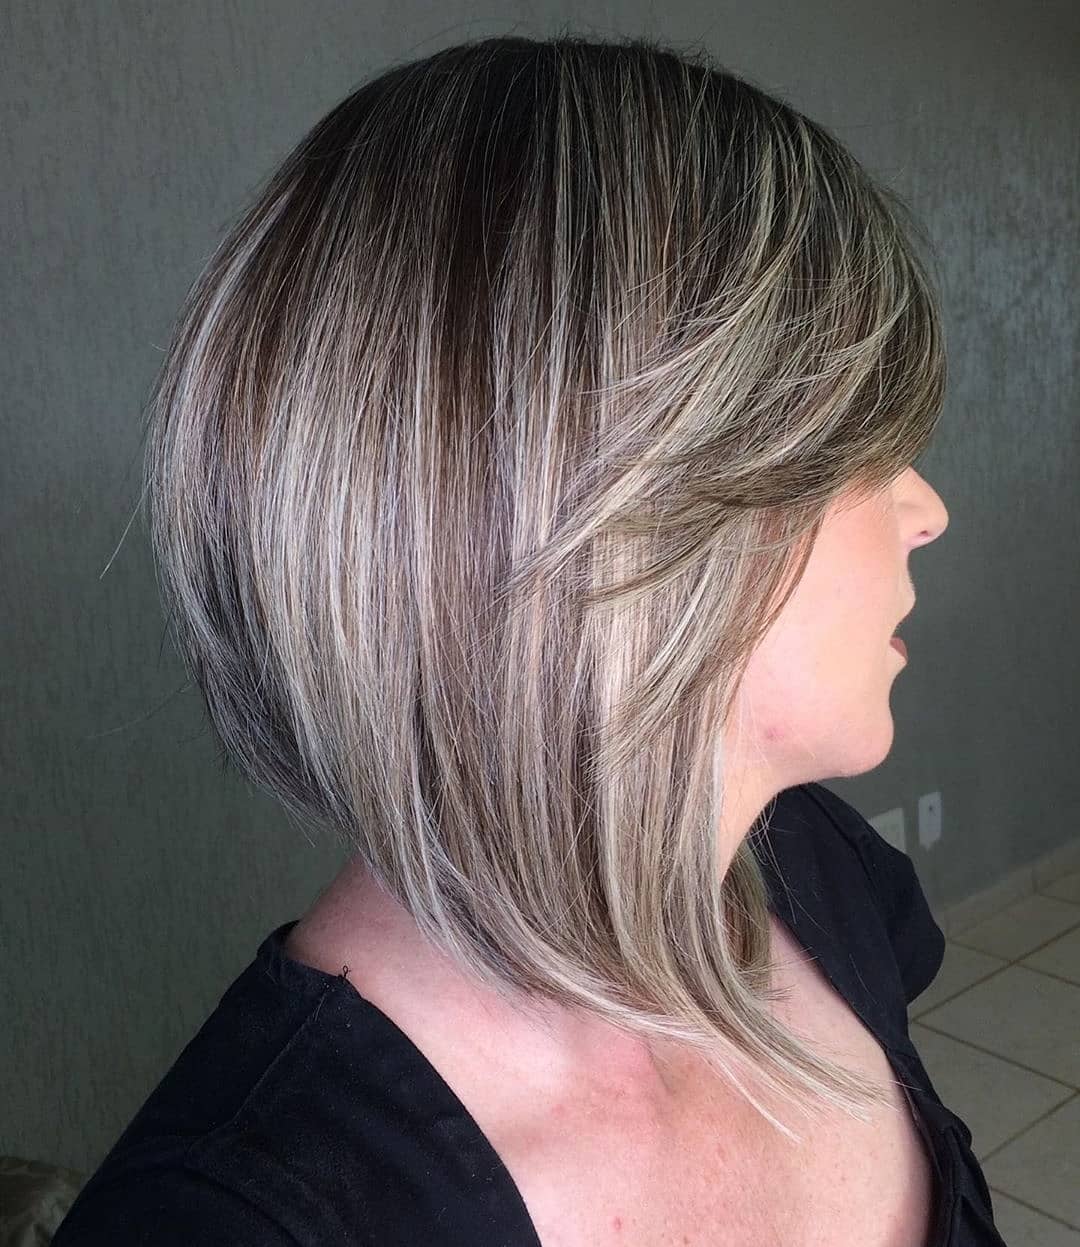 Graduated bob with extension for women aged 40-50 photo 2